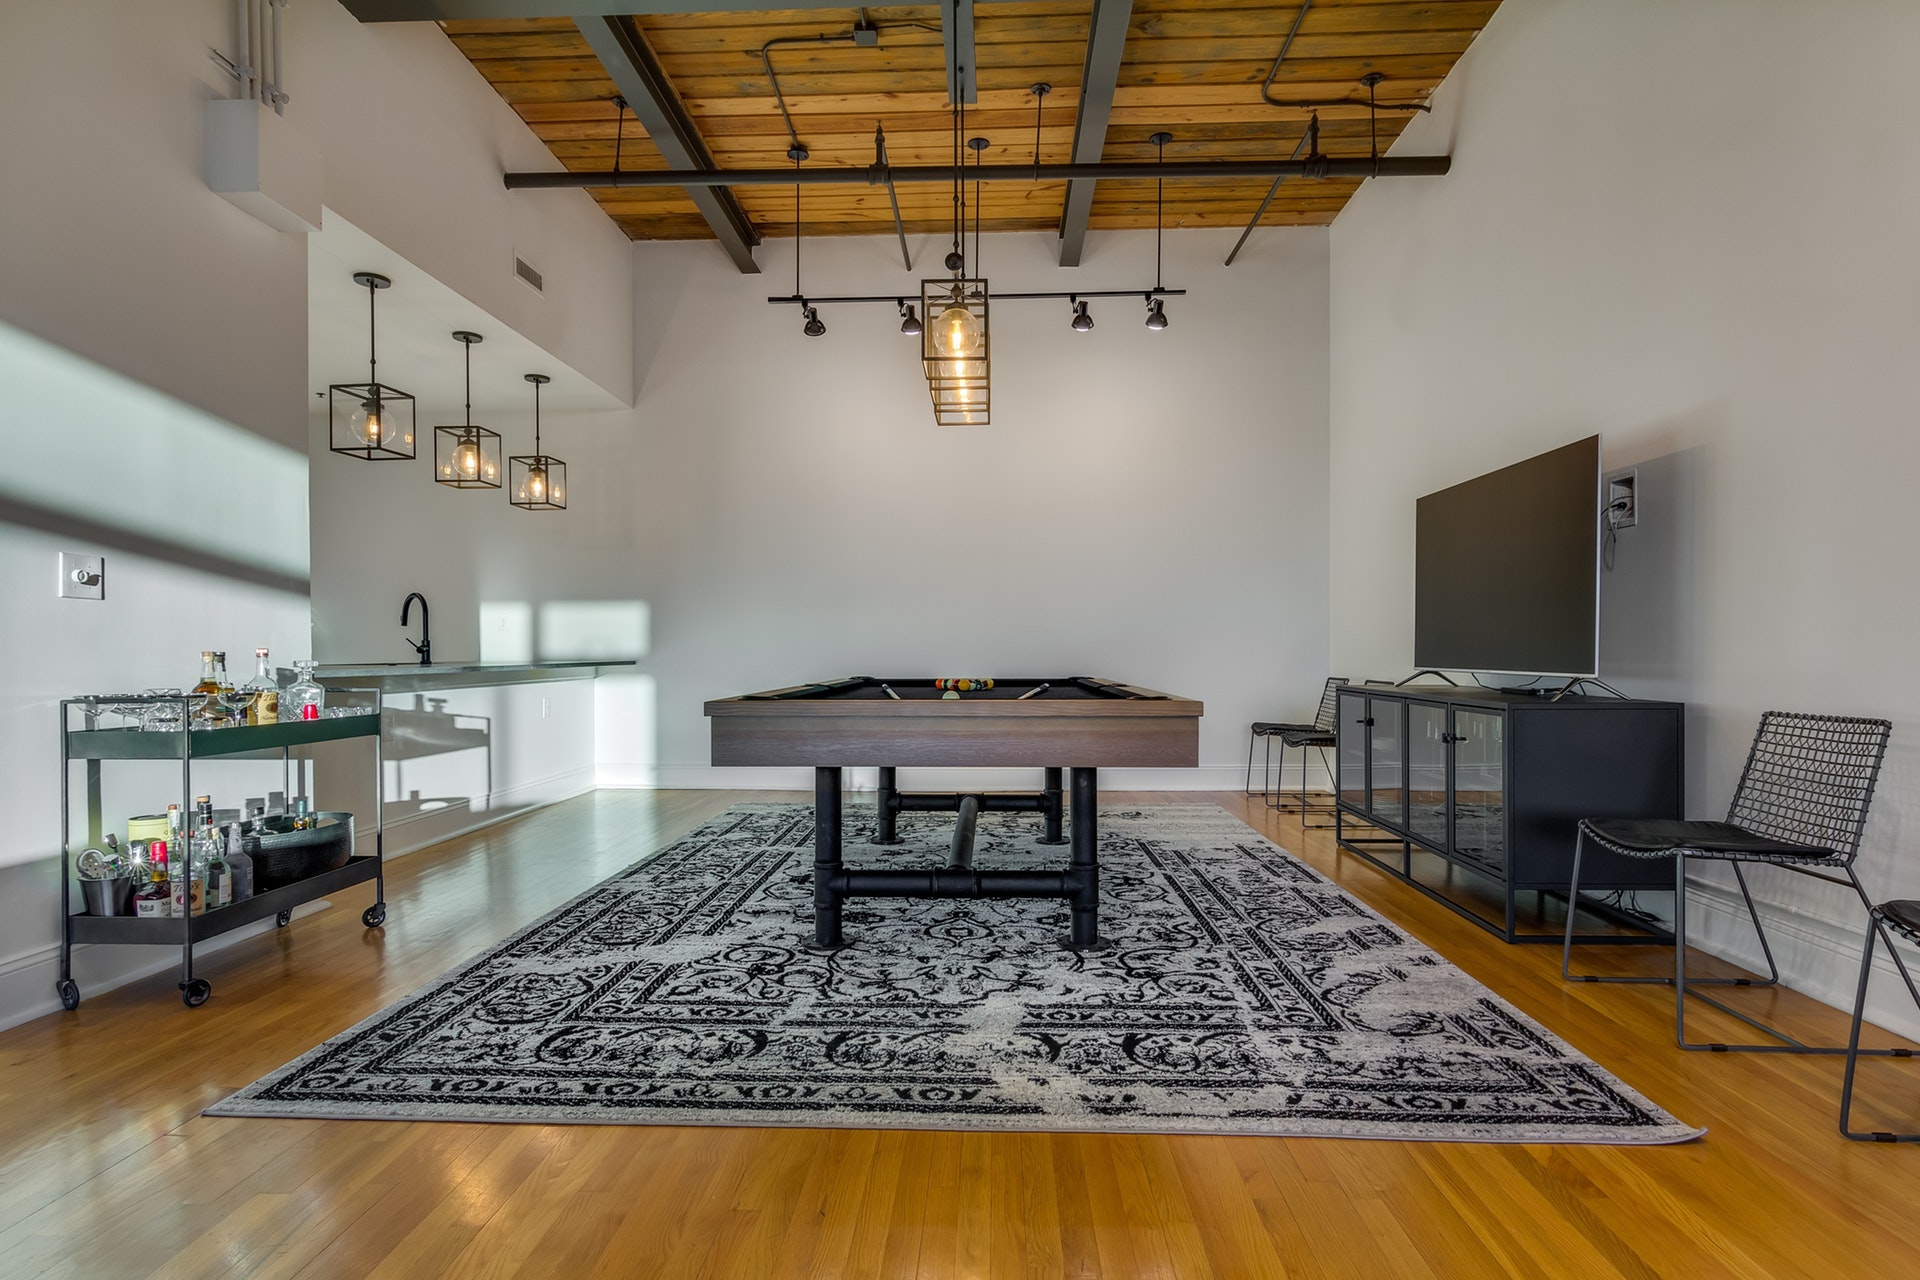 Game room with light wood floor white walls light wood ceiling exposed pipes track and pendant lighting